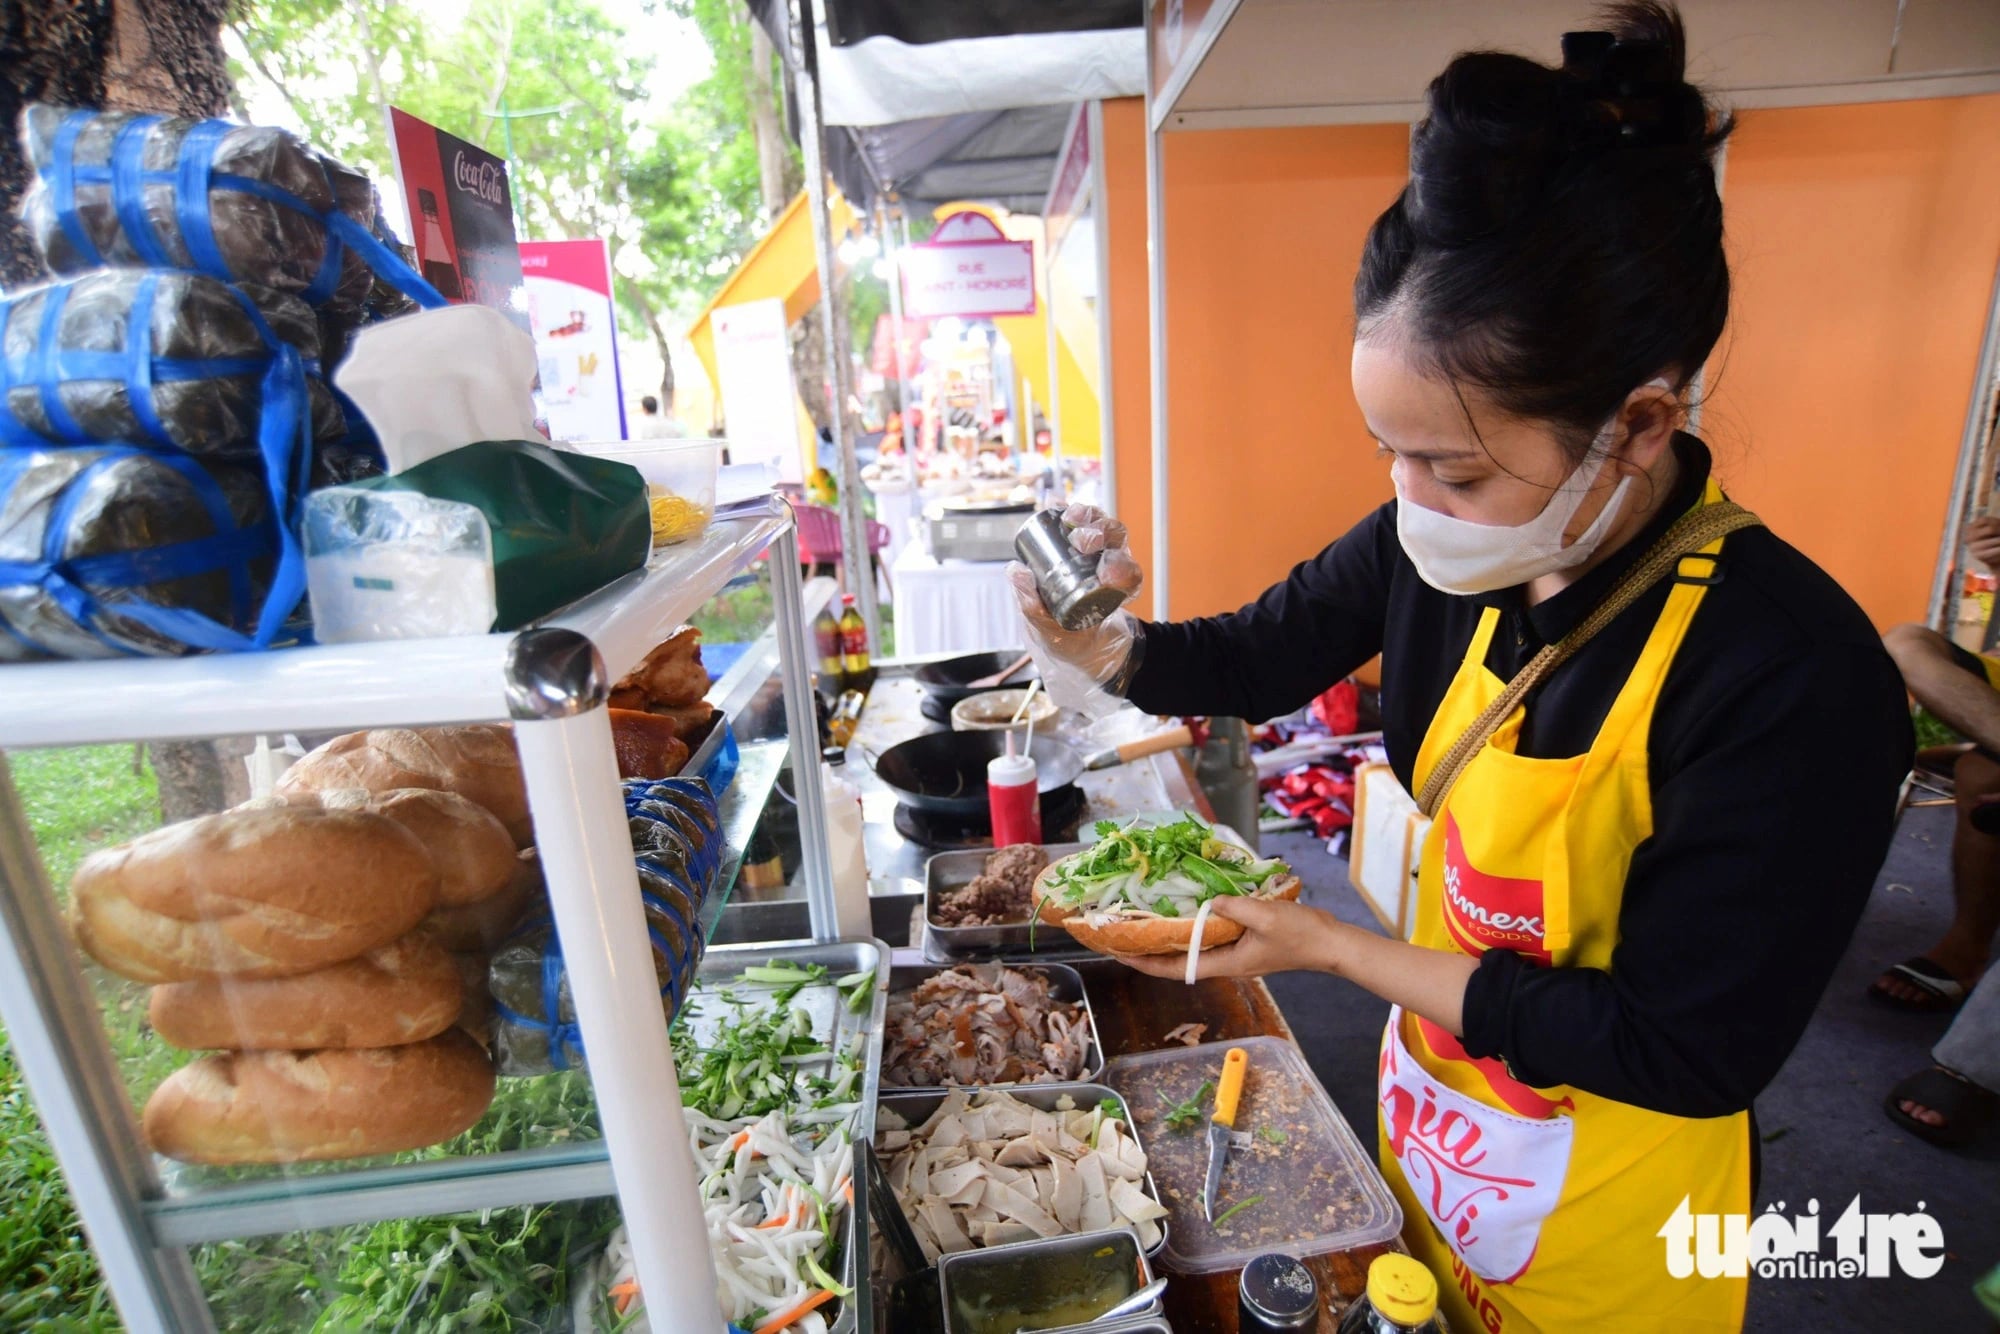 Staff is making ‘banh mi’ at a booth at the Vietnam Banh Mi Festival at Le Van Tam Park in District 1, Ho Chi Minh City on May 17. Photo: Quang Dinh / Tuoi Tre